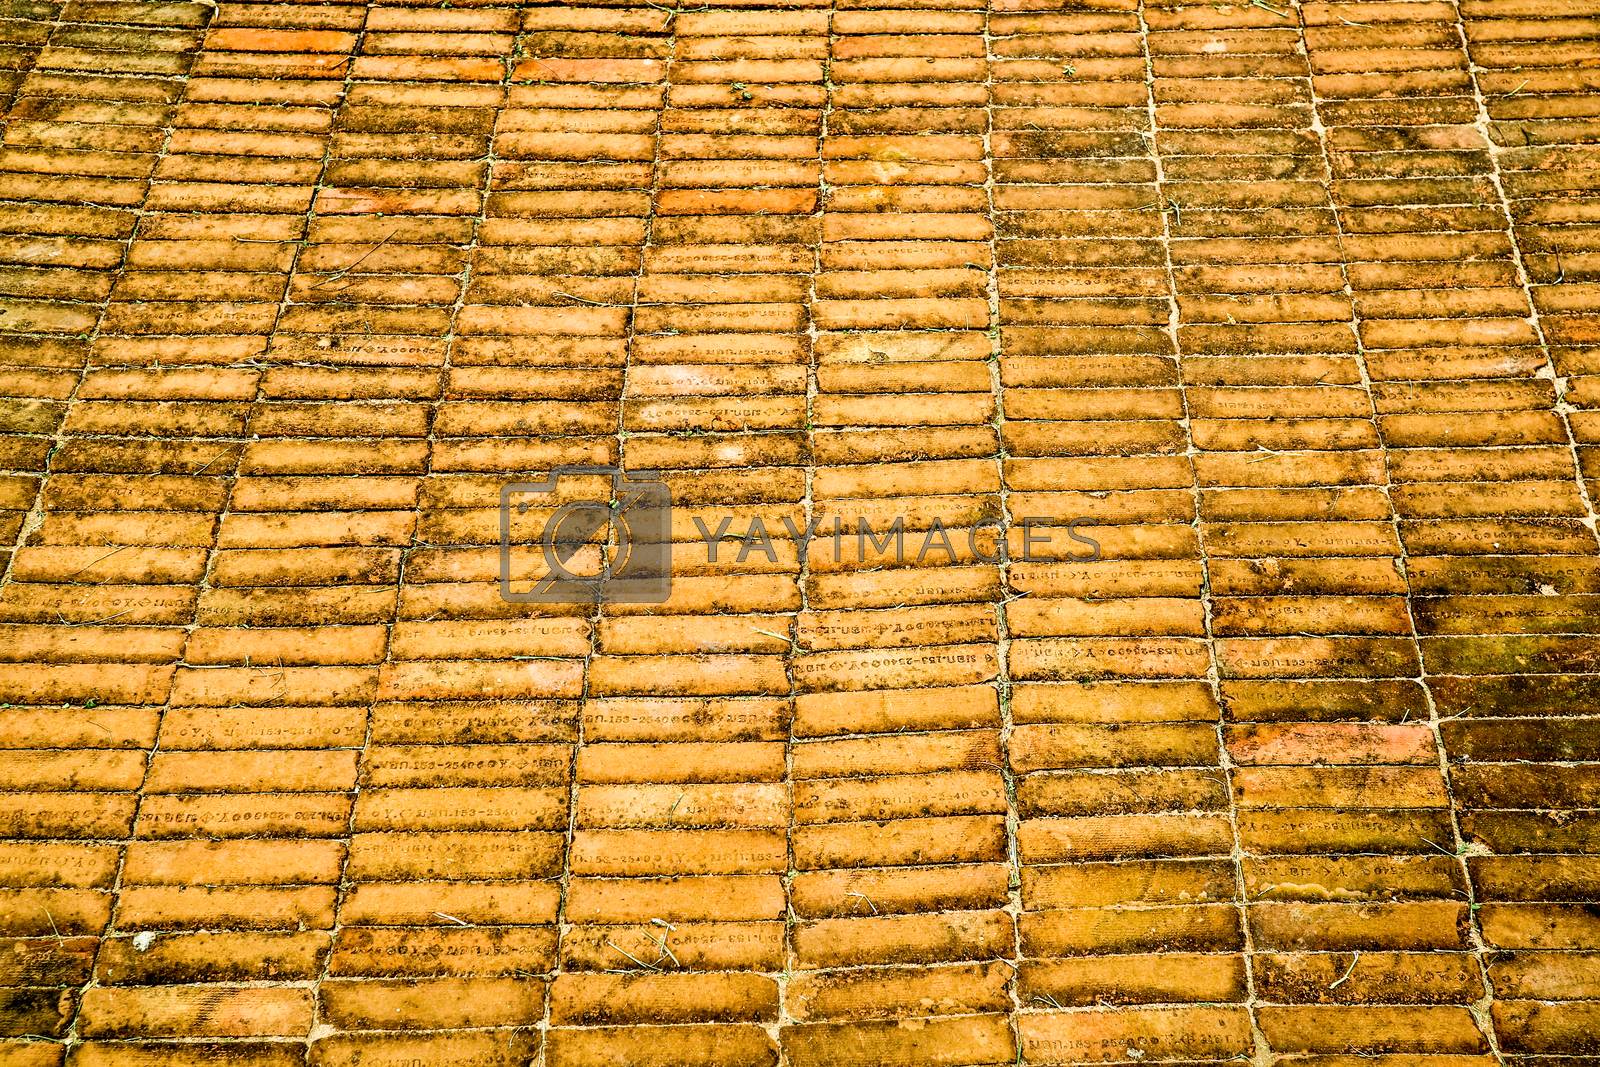 Royalty free image of rust and erosion of ancient brick floor by Darkfox